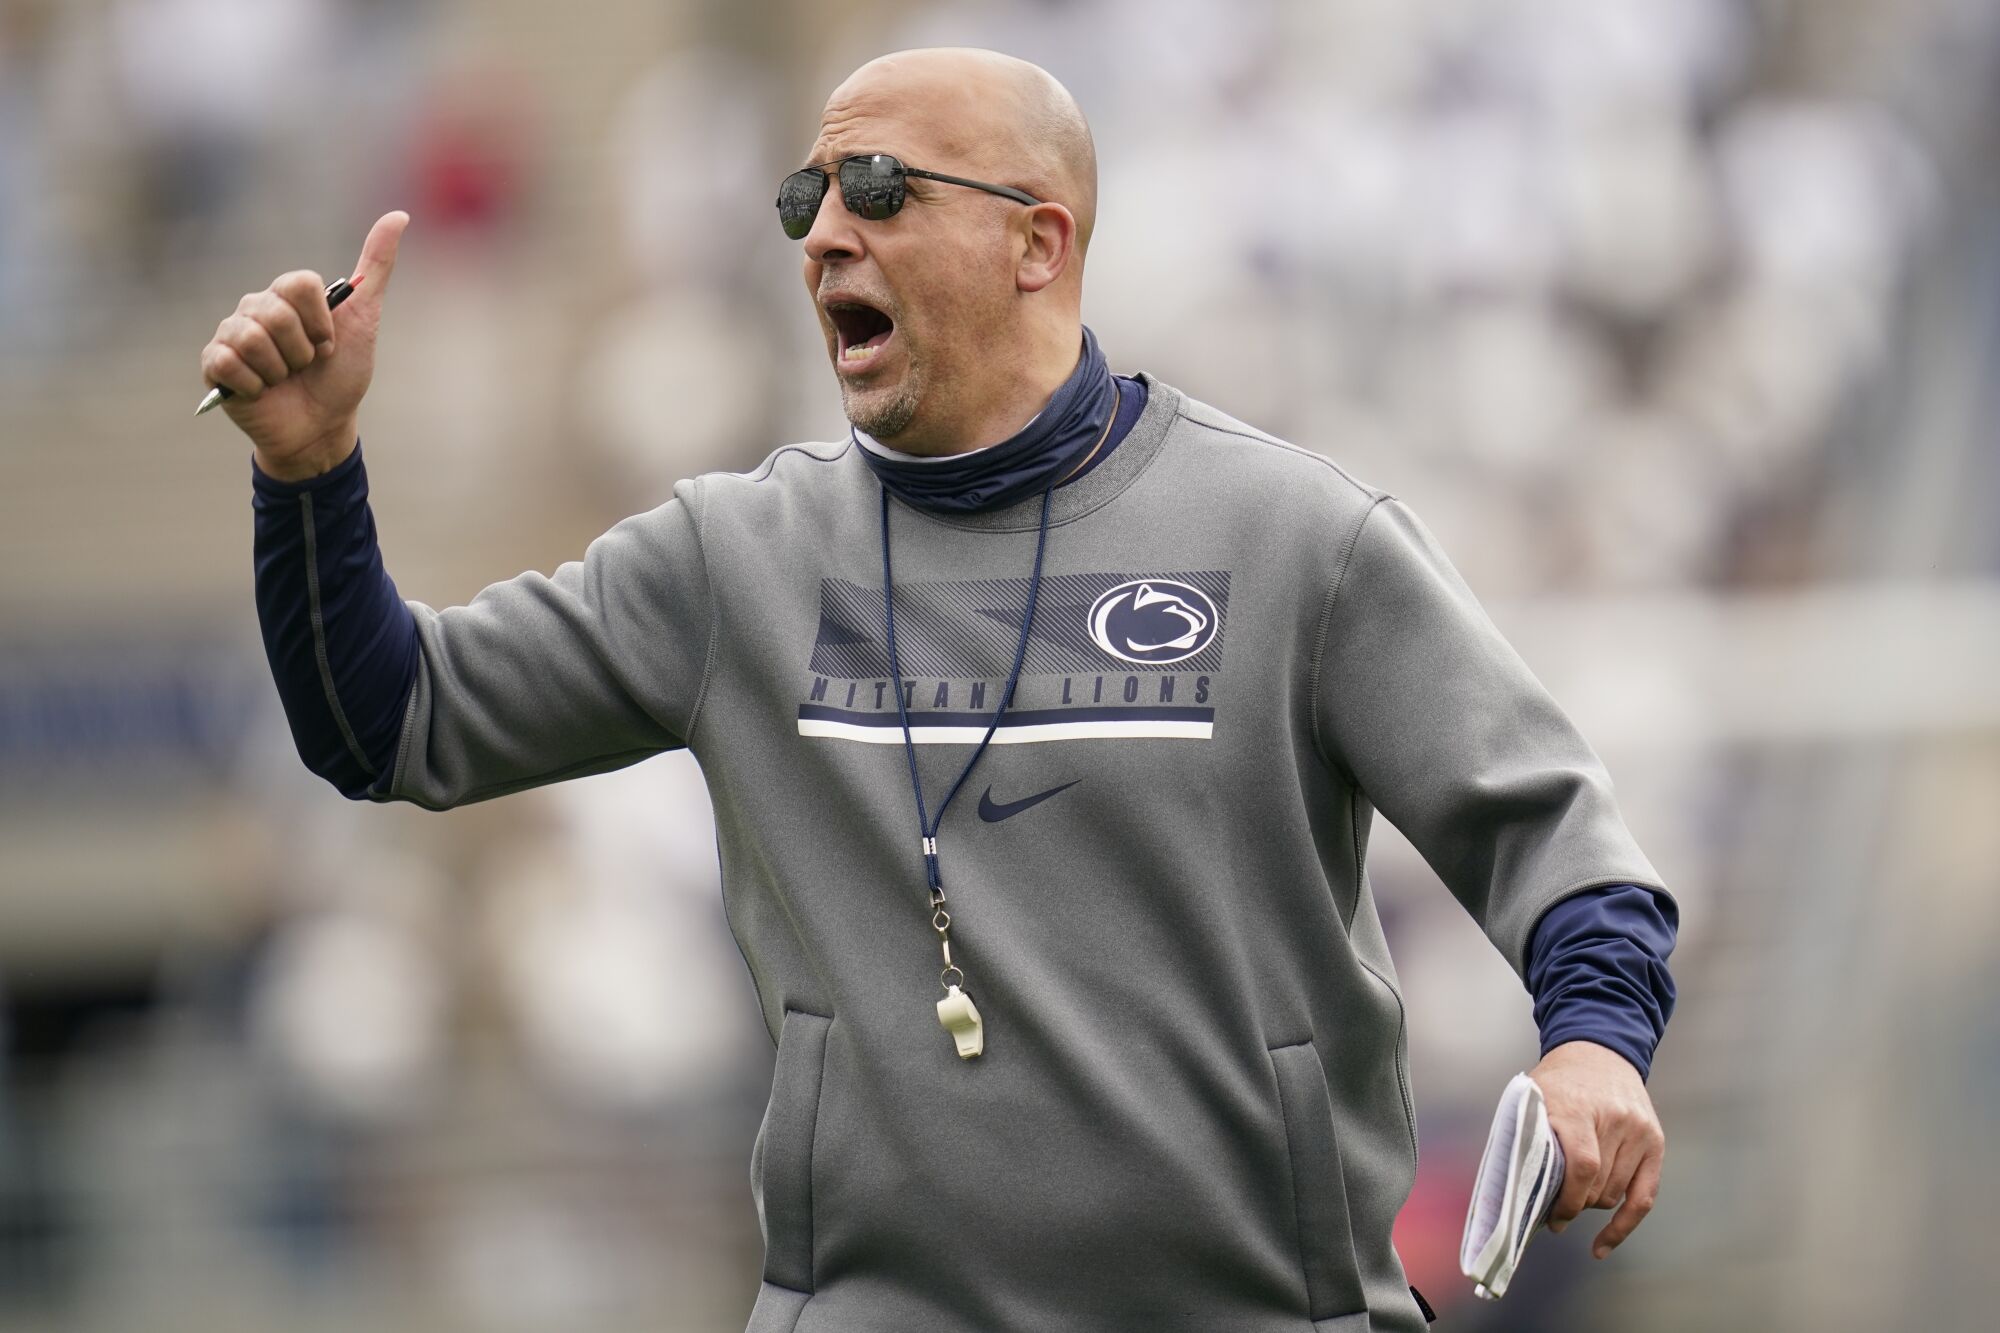 Penn State coach James Franklin shouts instructions to players during a practice